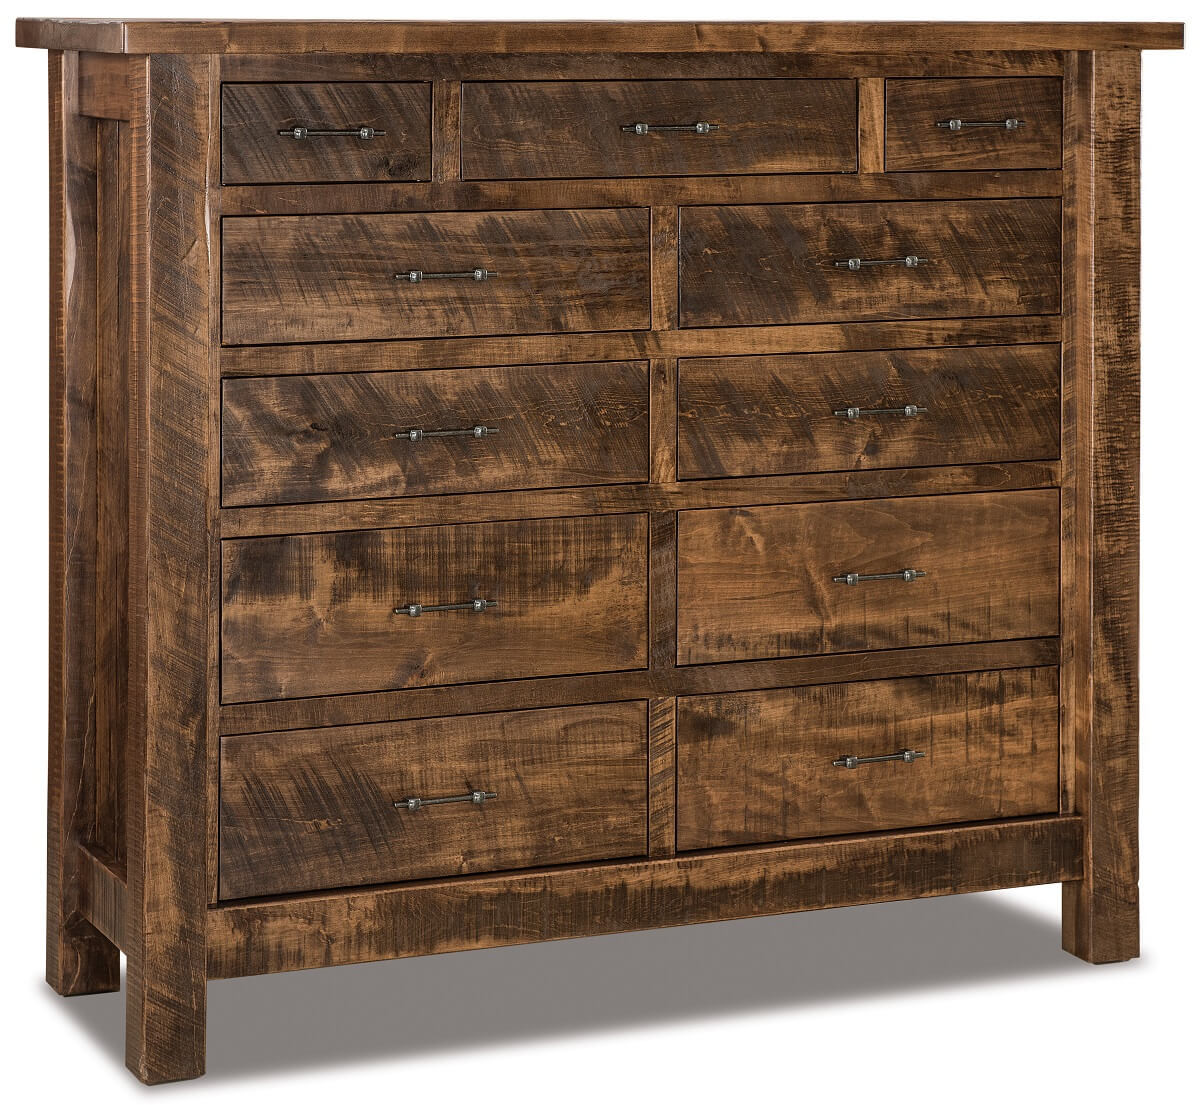 Brinkley Grand Chest of Drawers